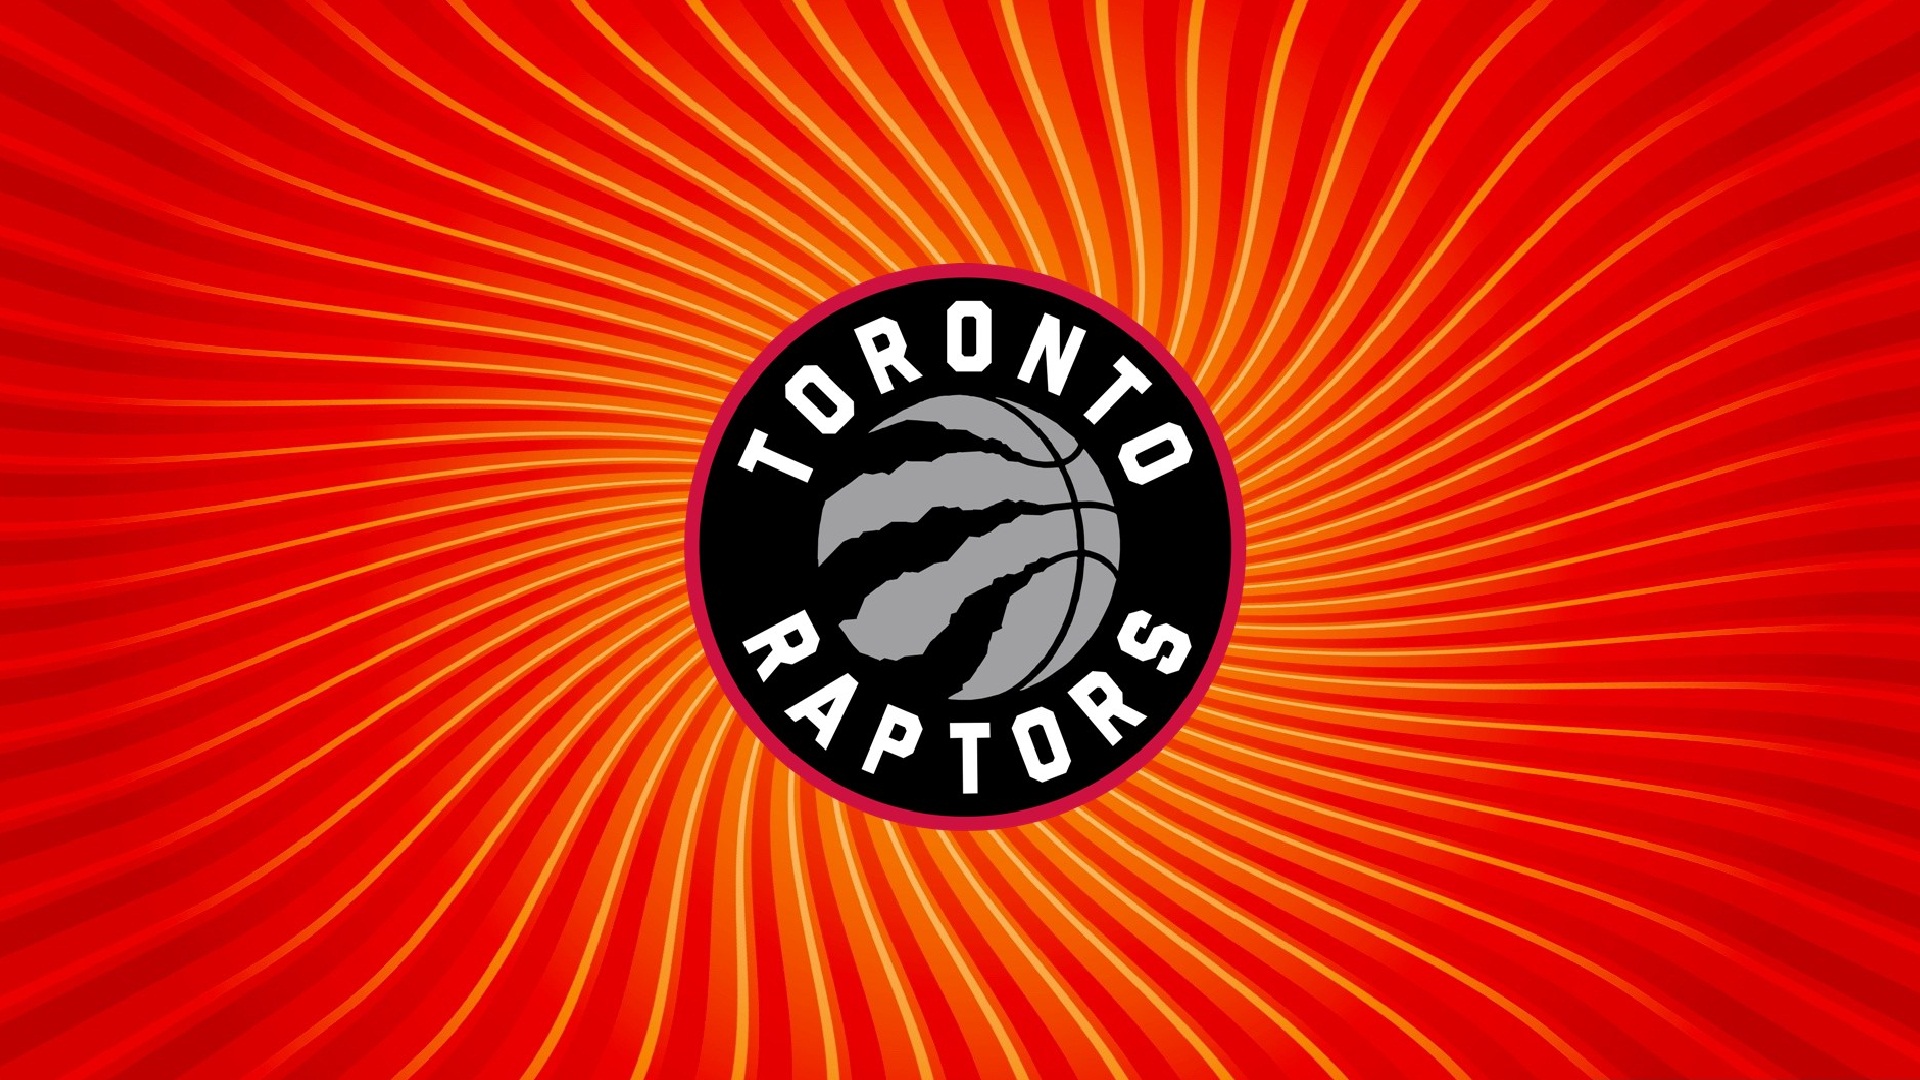 Toronto Raptors Mac Backgrounds with image dimensions 1920x1080 pixel. You can make this wallpaper for your Desktop Computer Backgrounds, Windows or Mac Screensavers, iPhone Lock screen, Tablet or Android and another Mobile Phone device